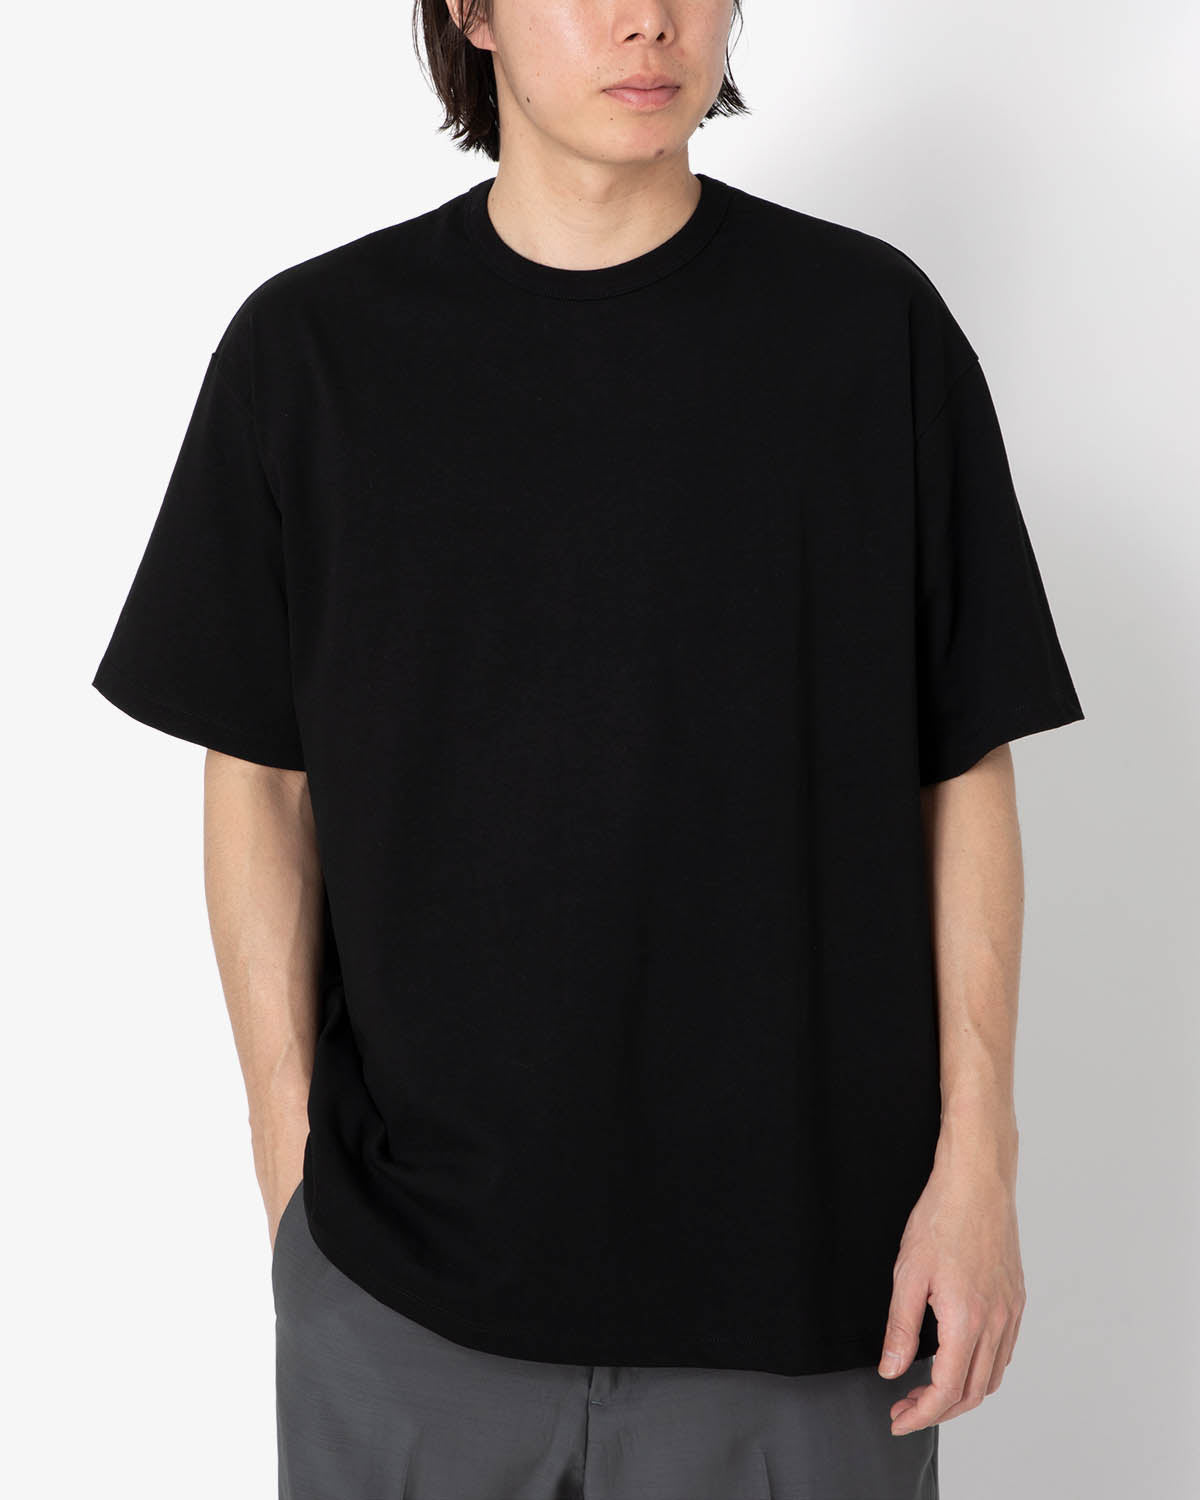 RECYCLED COTTON JERSEY S/S TEE